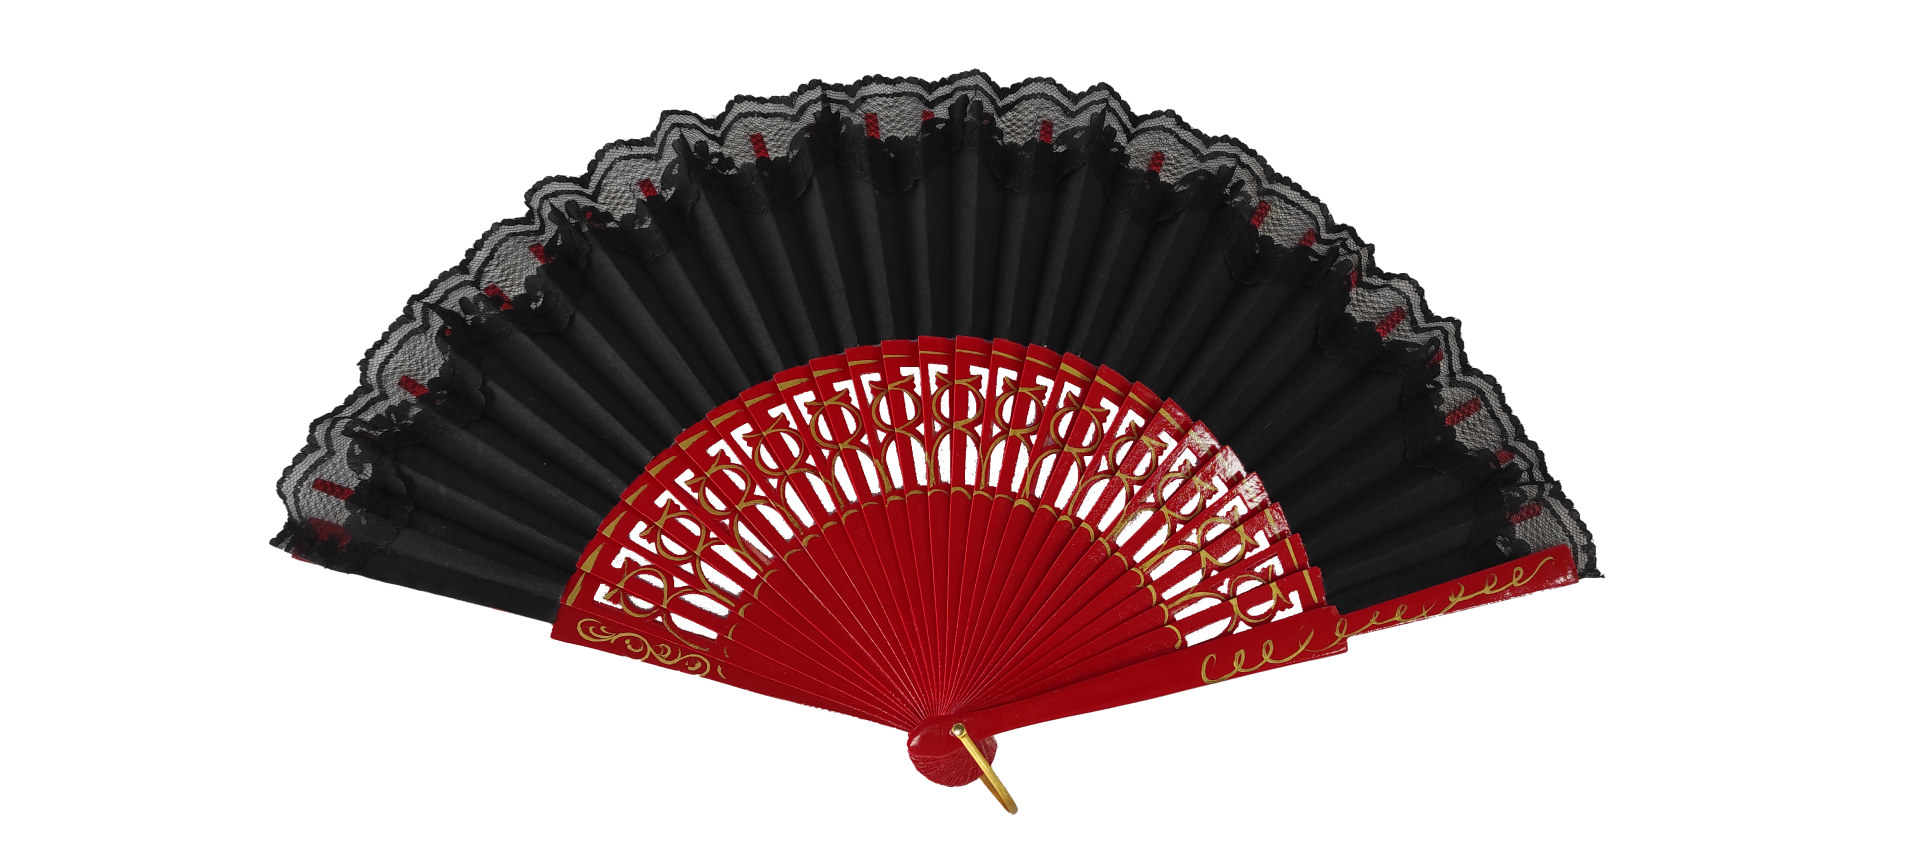 6314/11/1 RJ - NG  Wooden fan with lace (red and black)